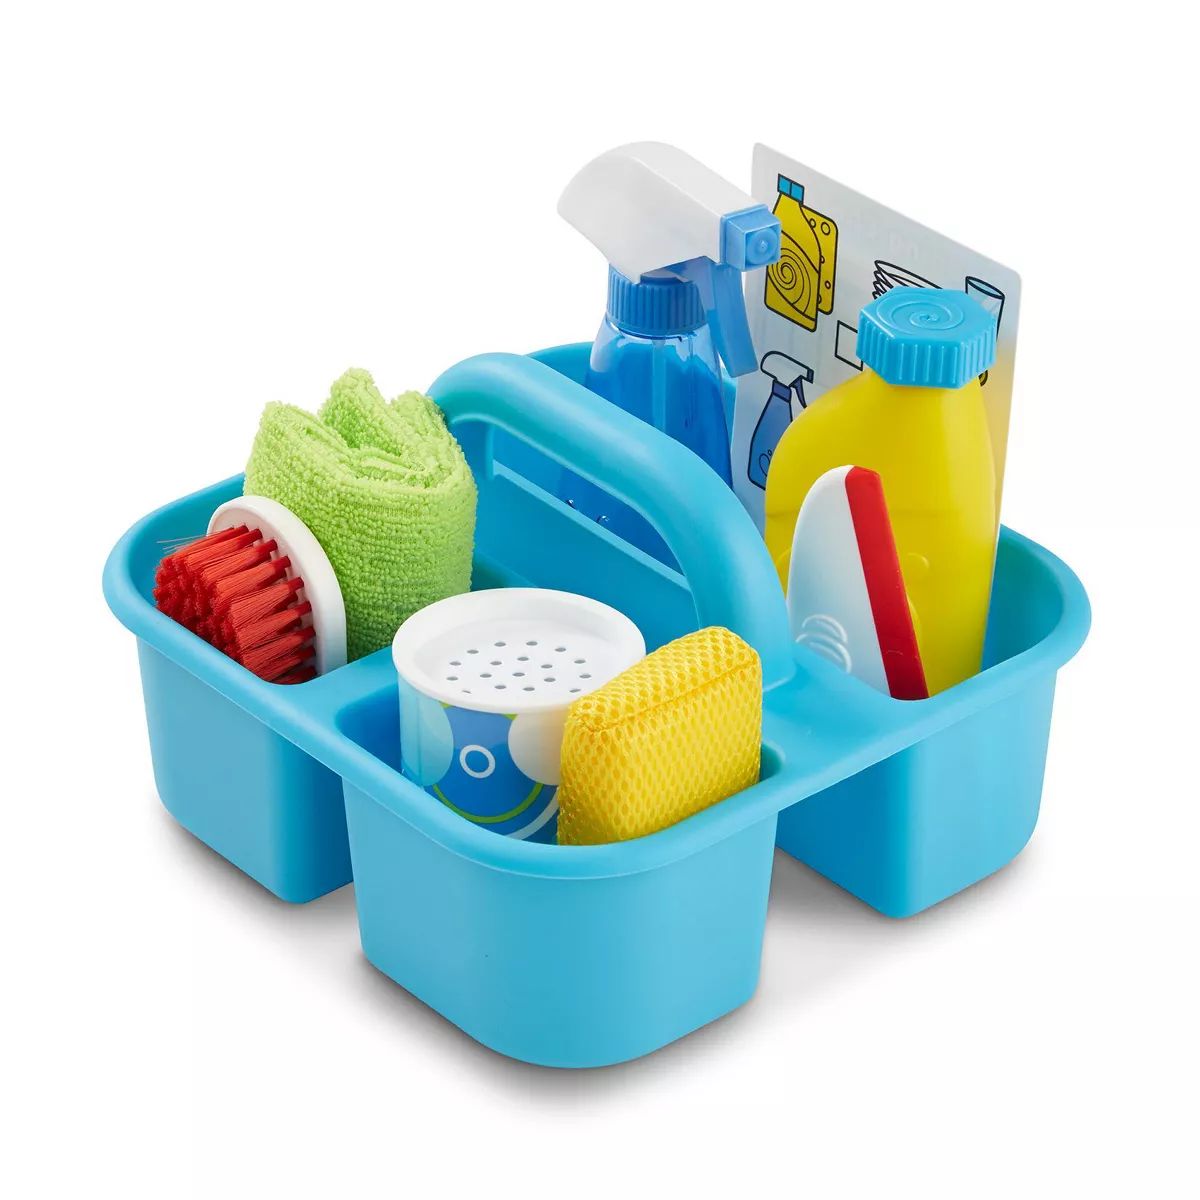 Melissa & Doug Spray, Squirt & Squeegee Play Set - Pretend Play Cleaning Set | Target